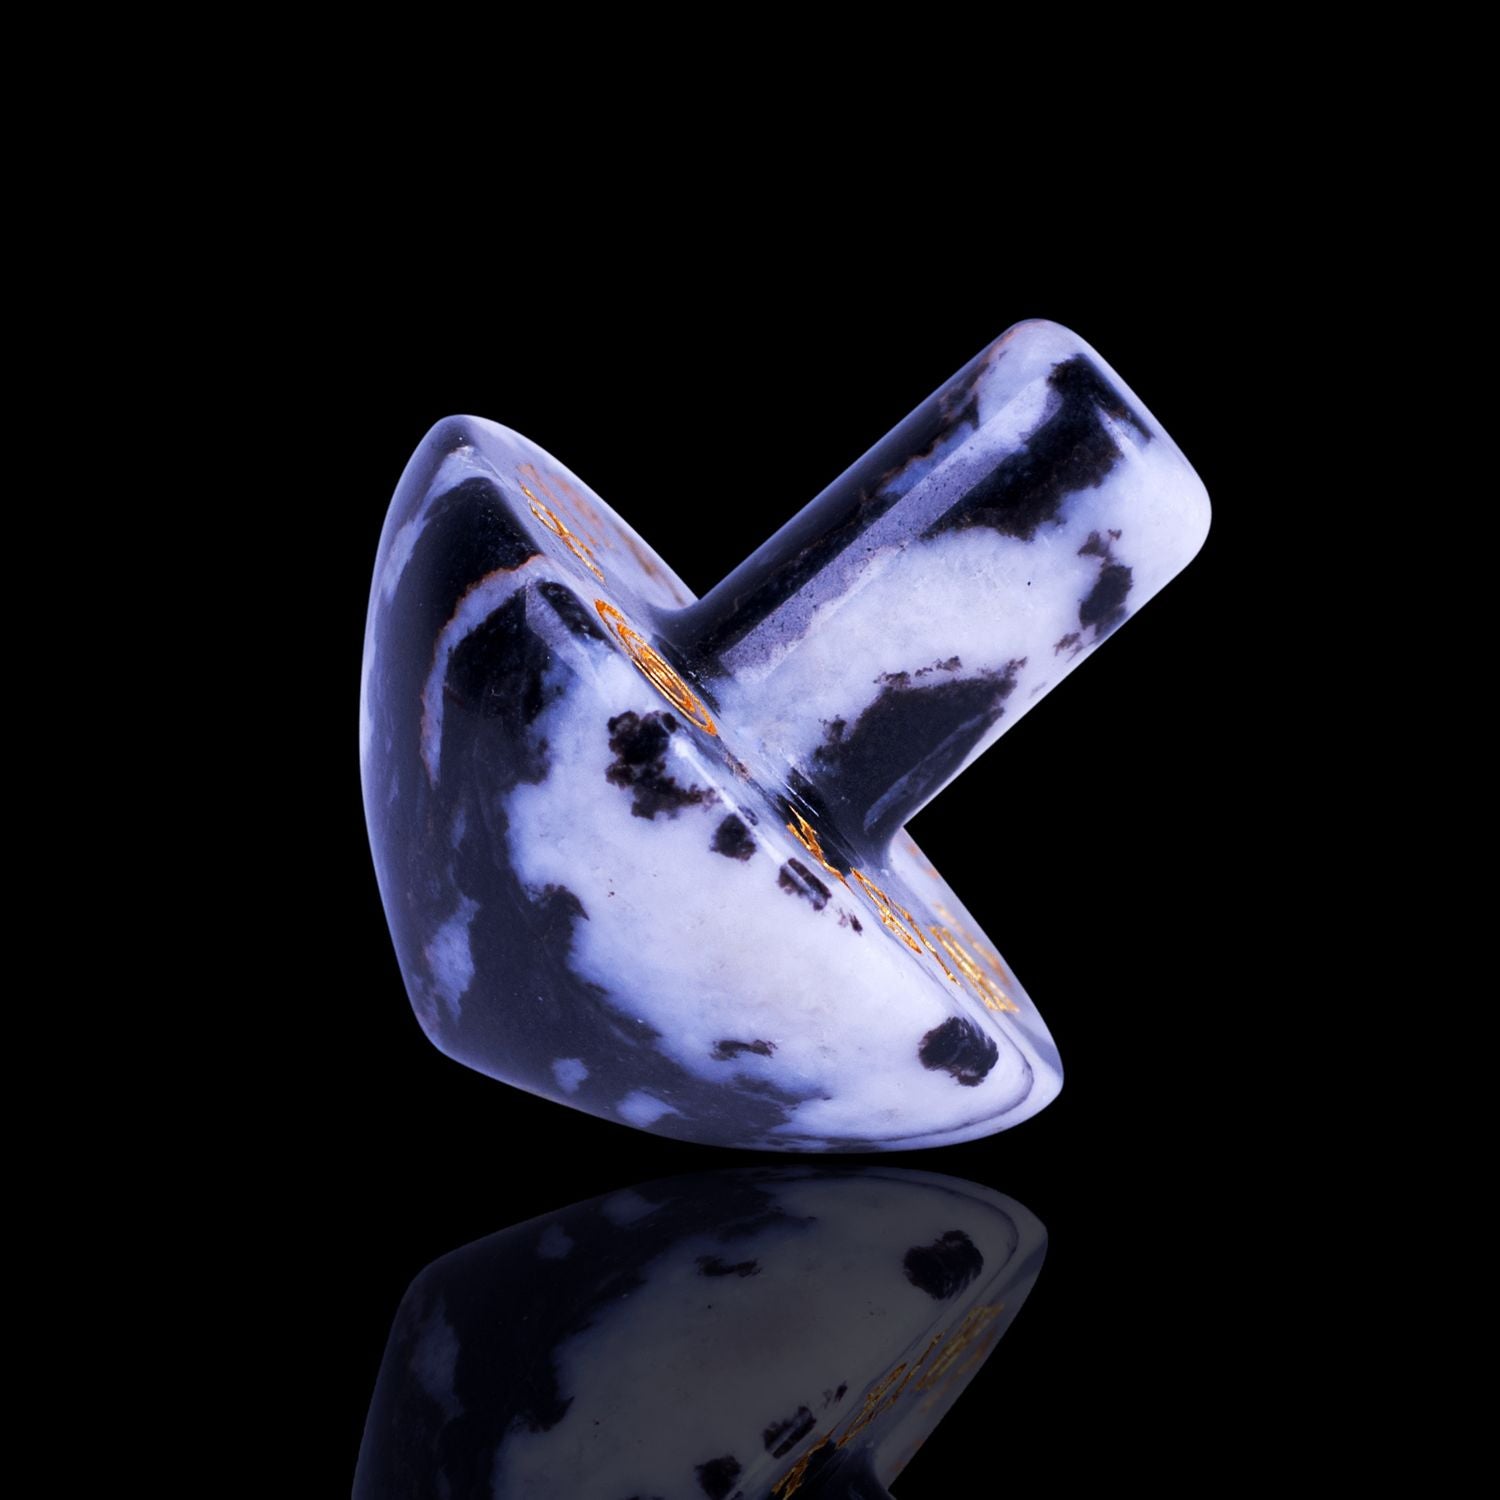 Naturally Wicked Exclusive Hypnotwister. A Zebra Jasper Crystal Spinning Top Engraved With Hypno Twist